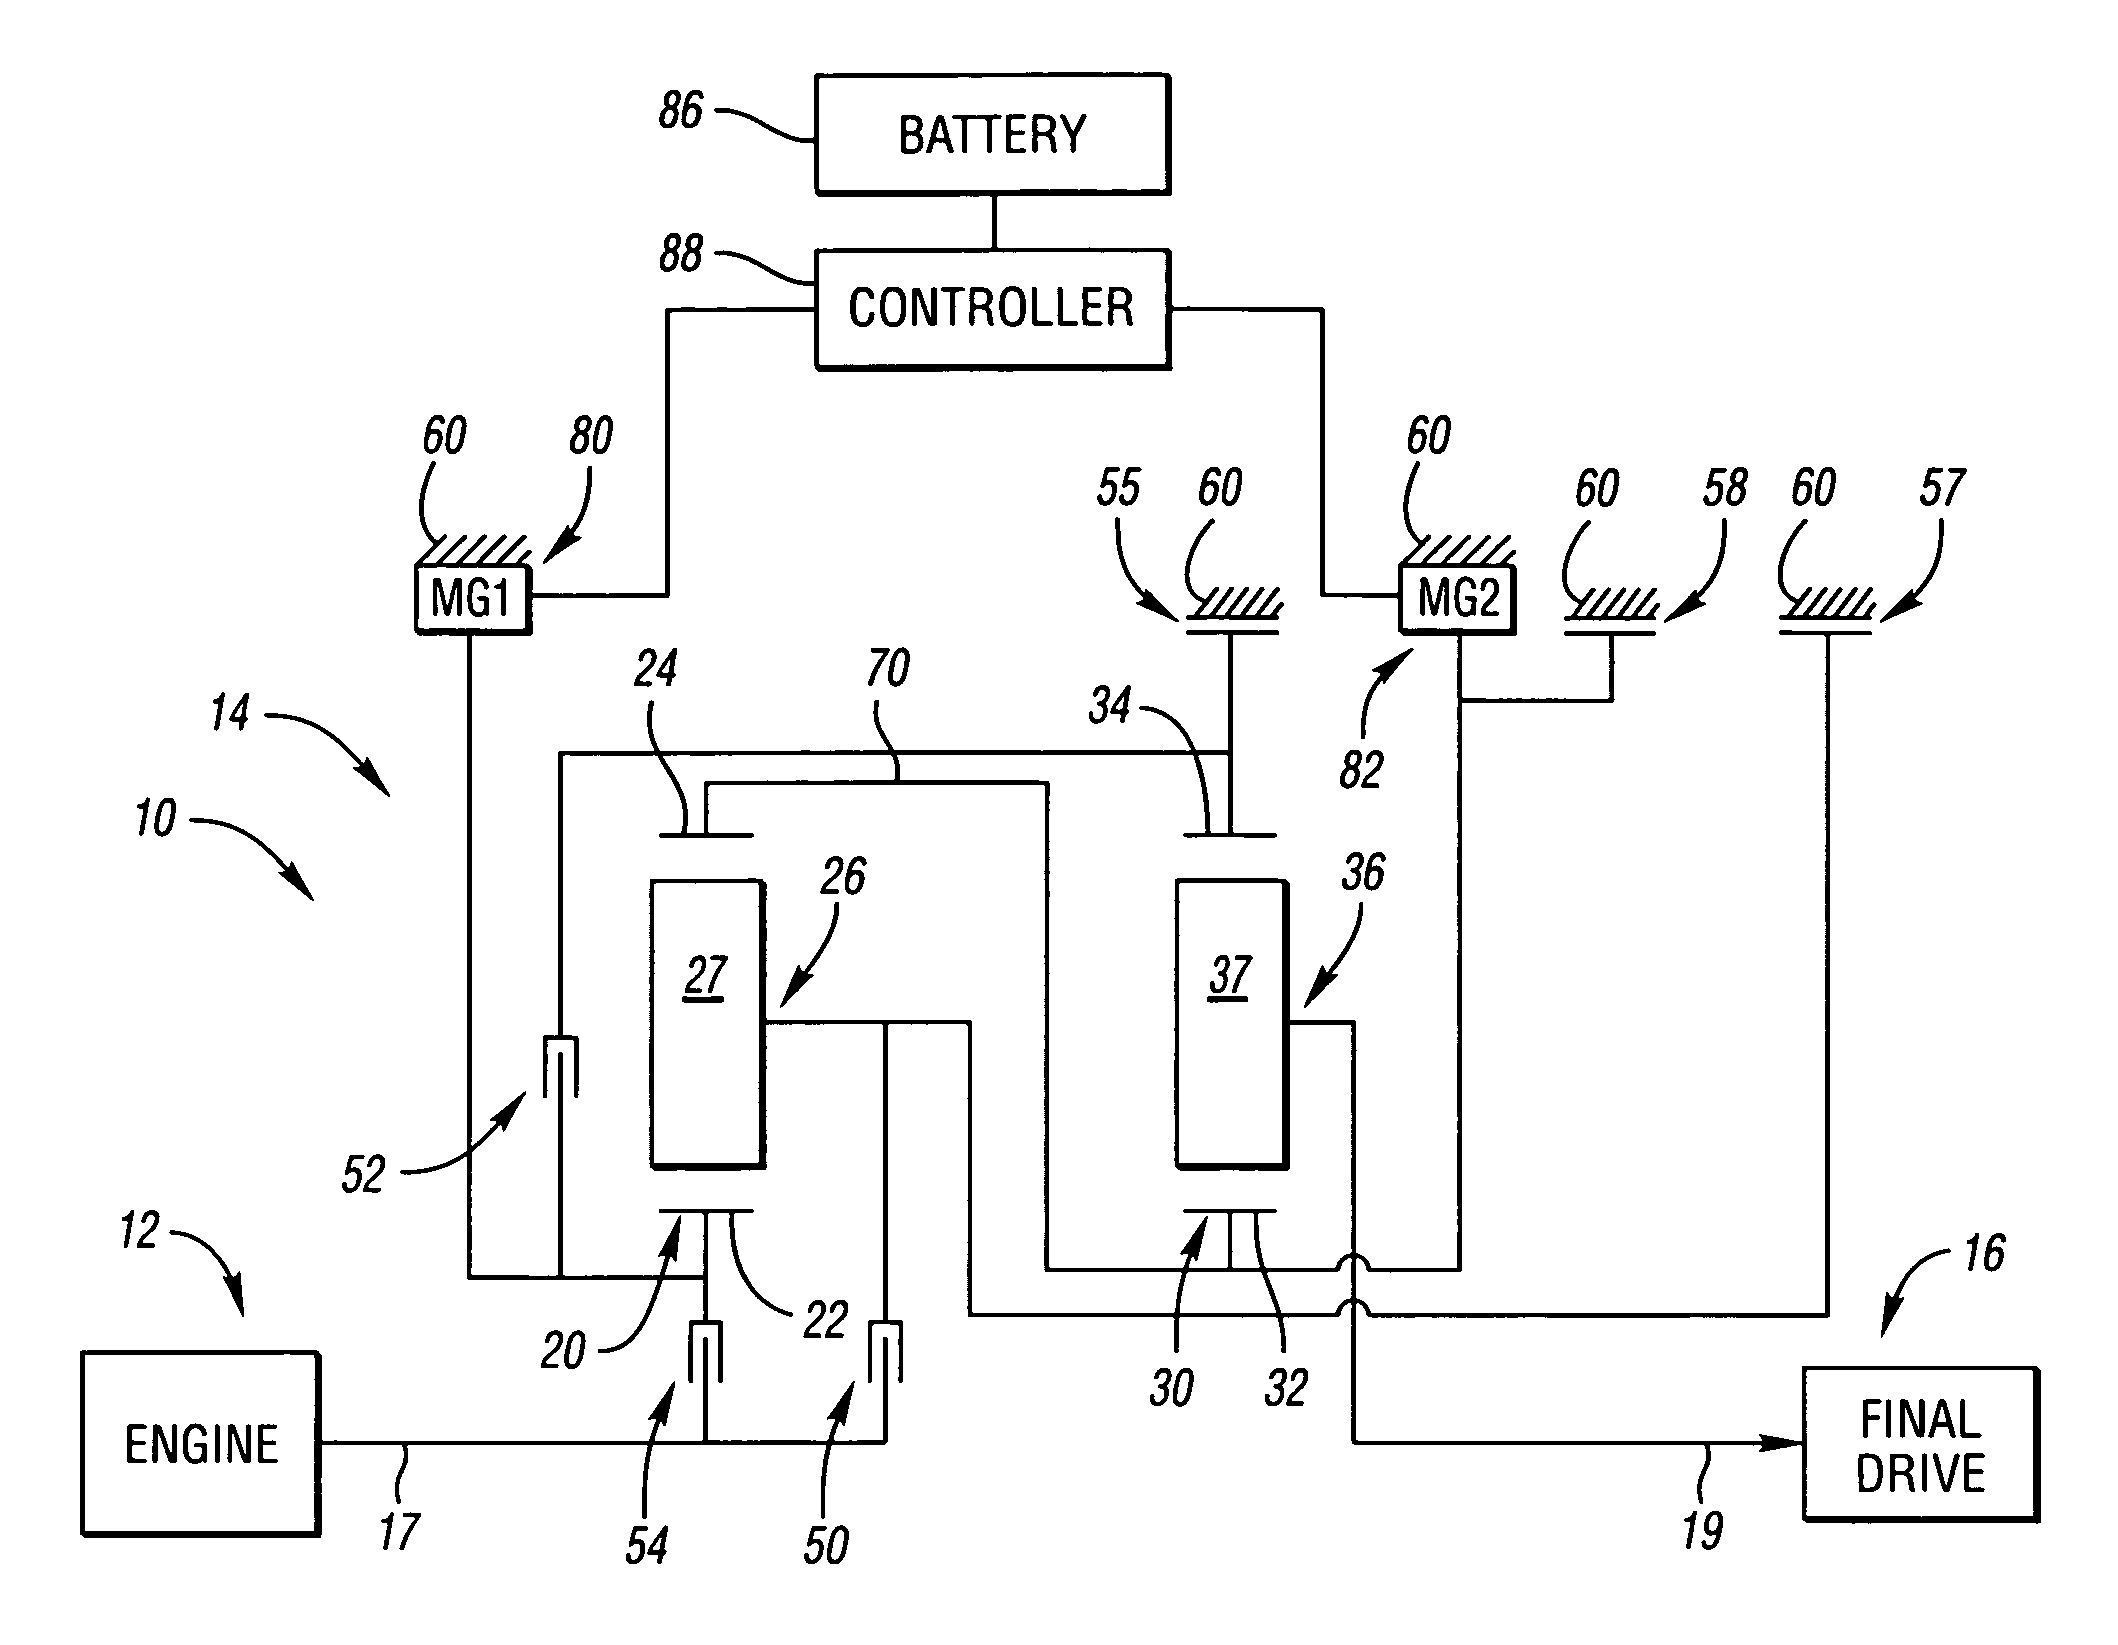 Two-planetary electrically variable transmissions with multiple fixed ratios